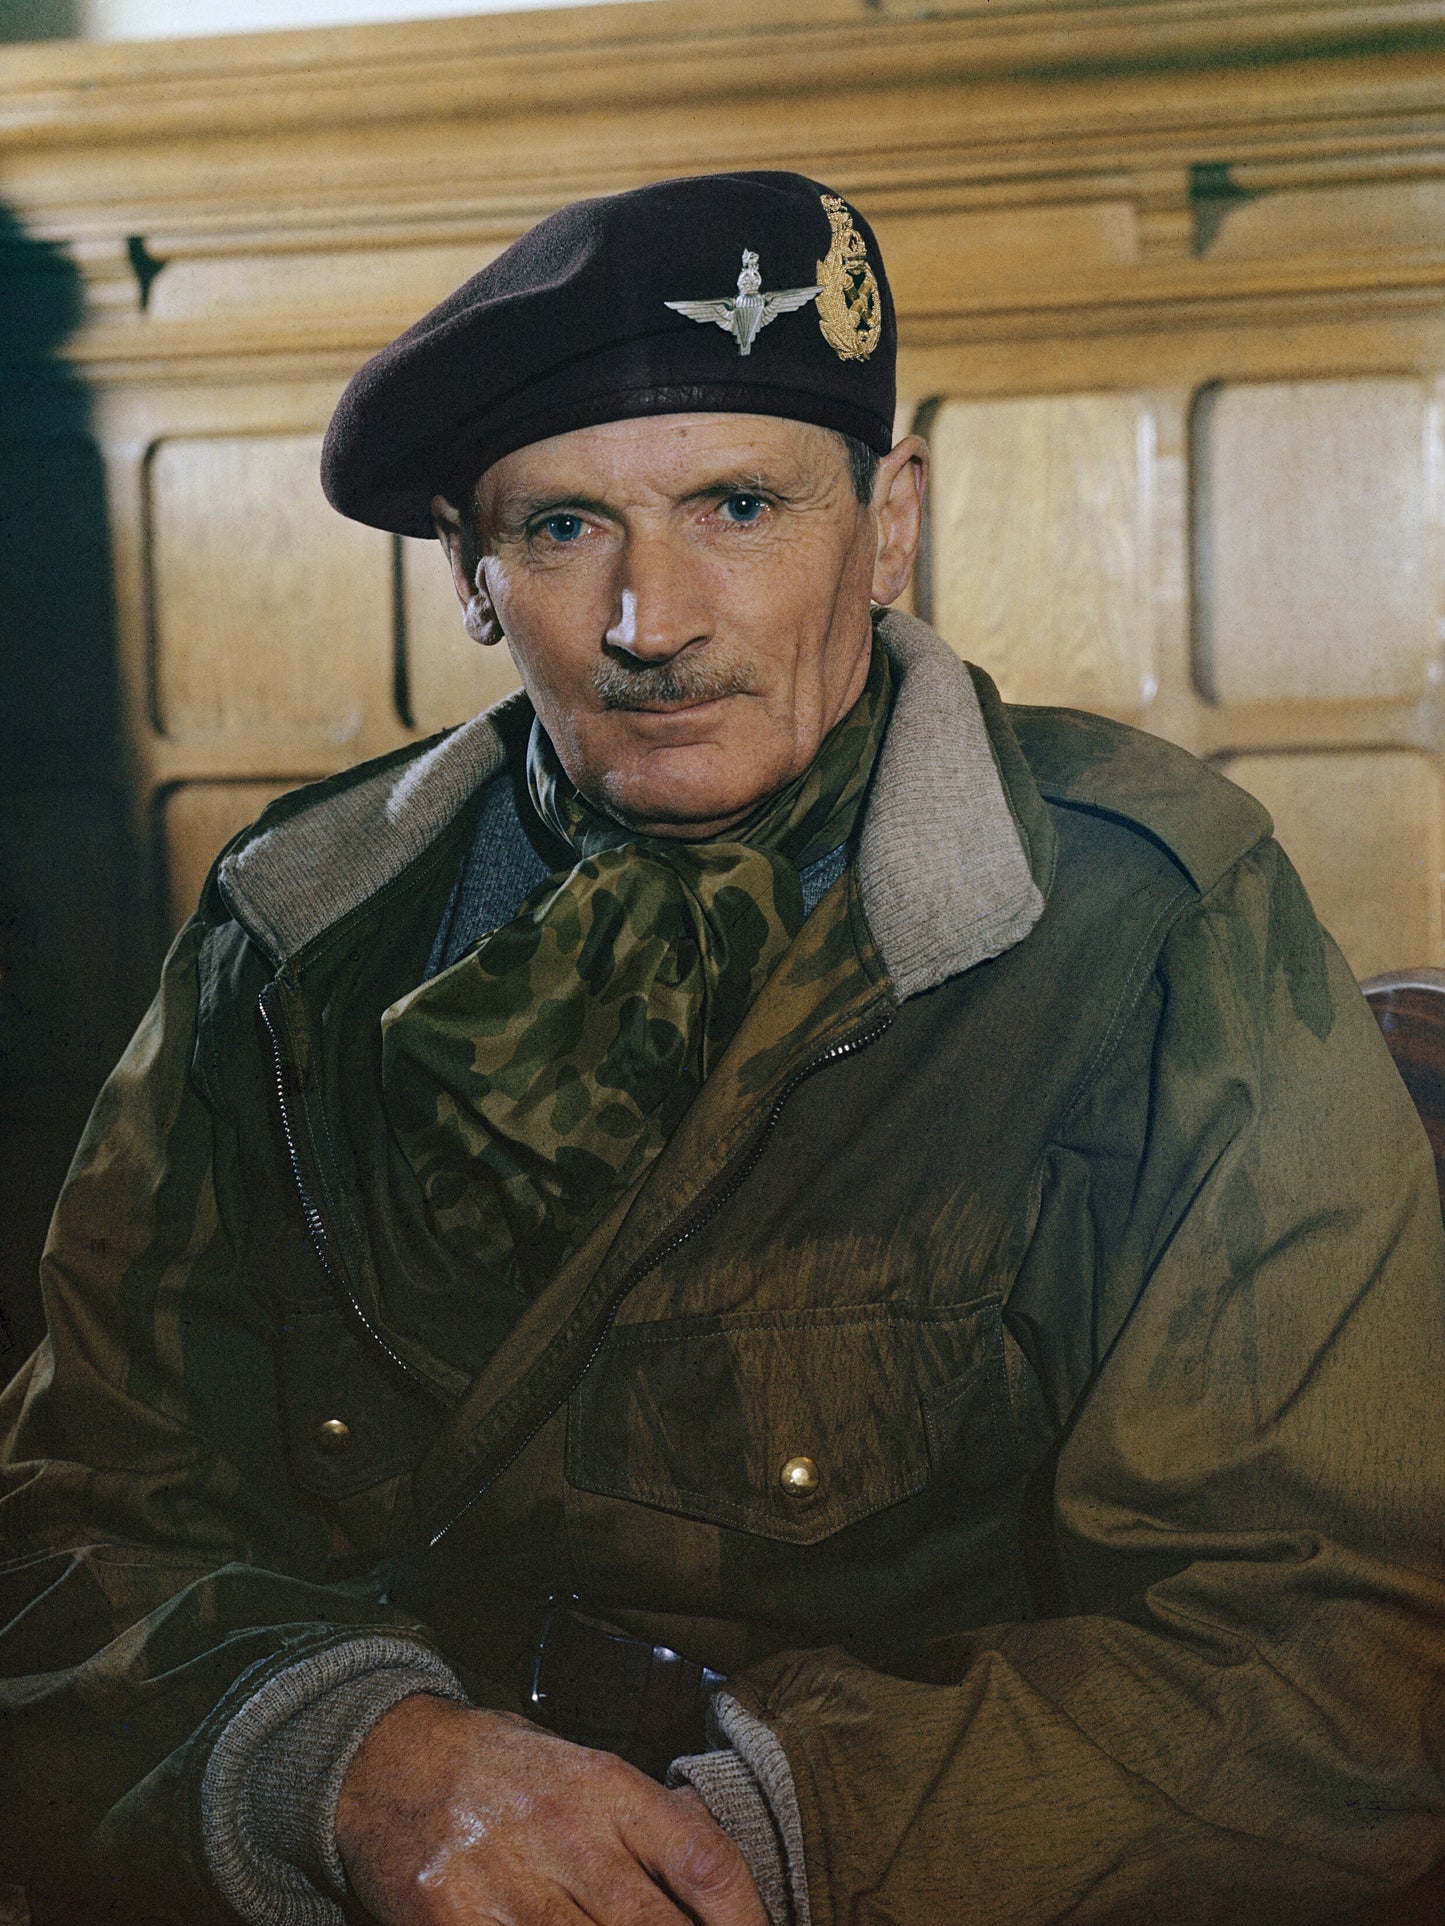 BERNARD LAW MONTY MONTGOMERY GLOSSY POSTER PICTURE PHOTO PRINT BANNER ww2